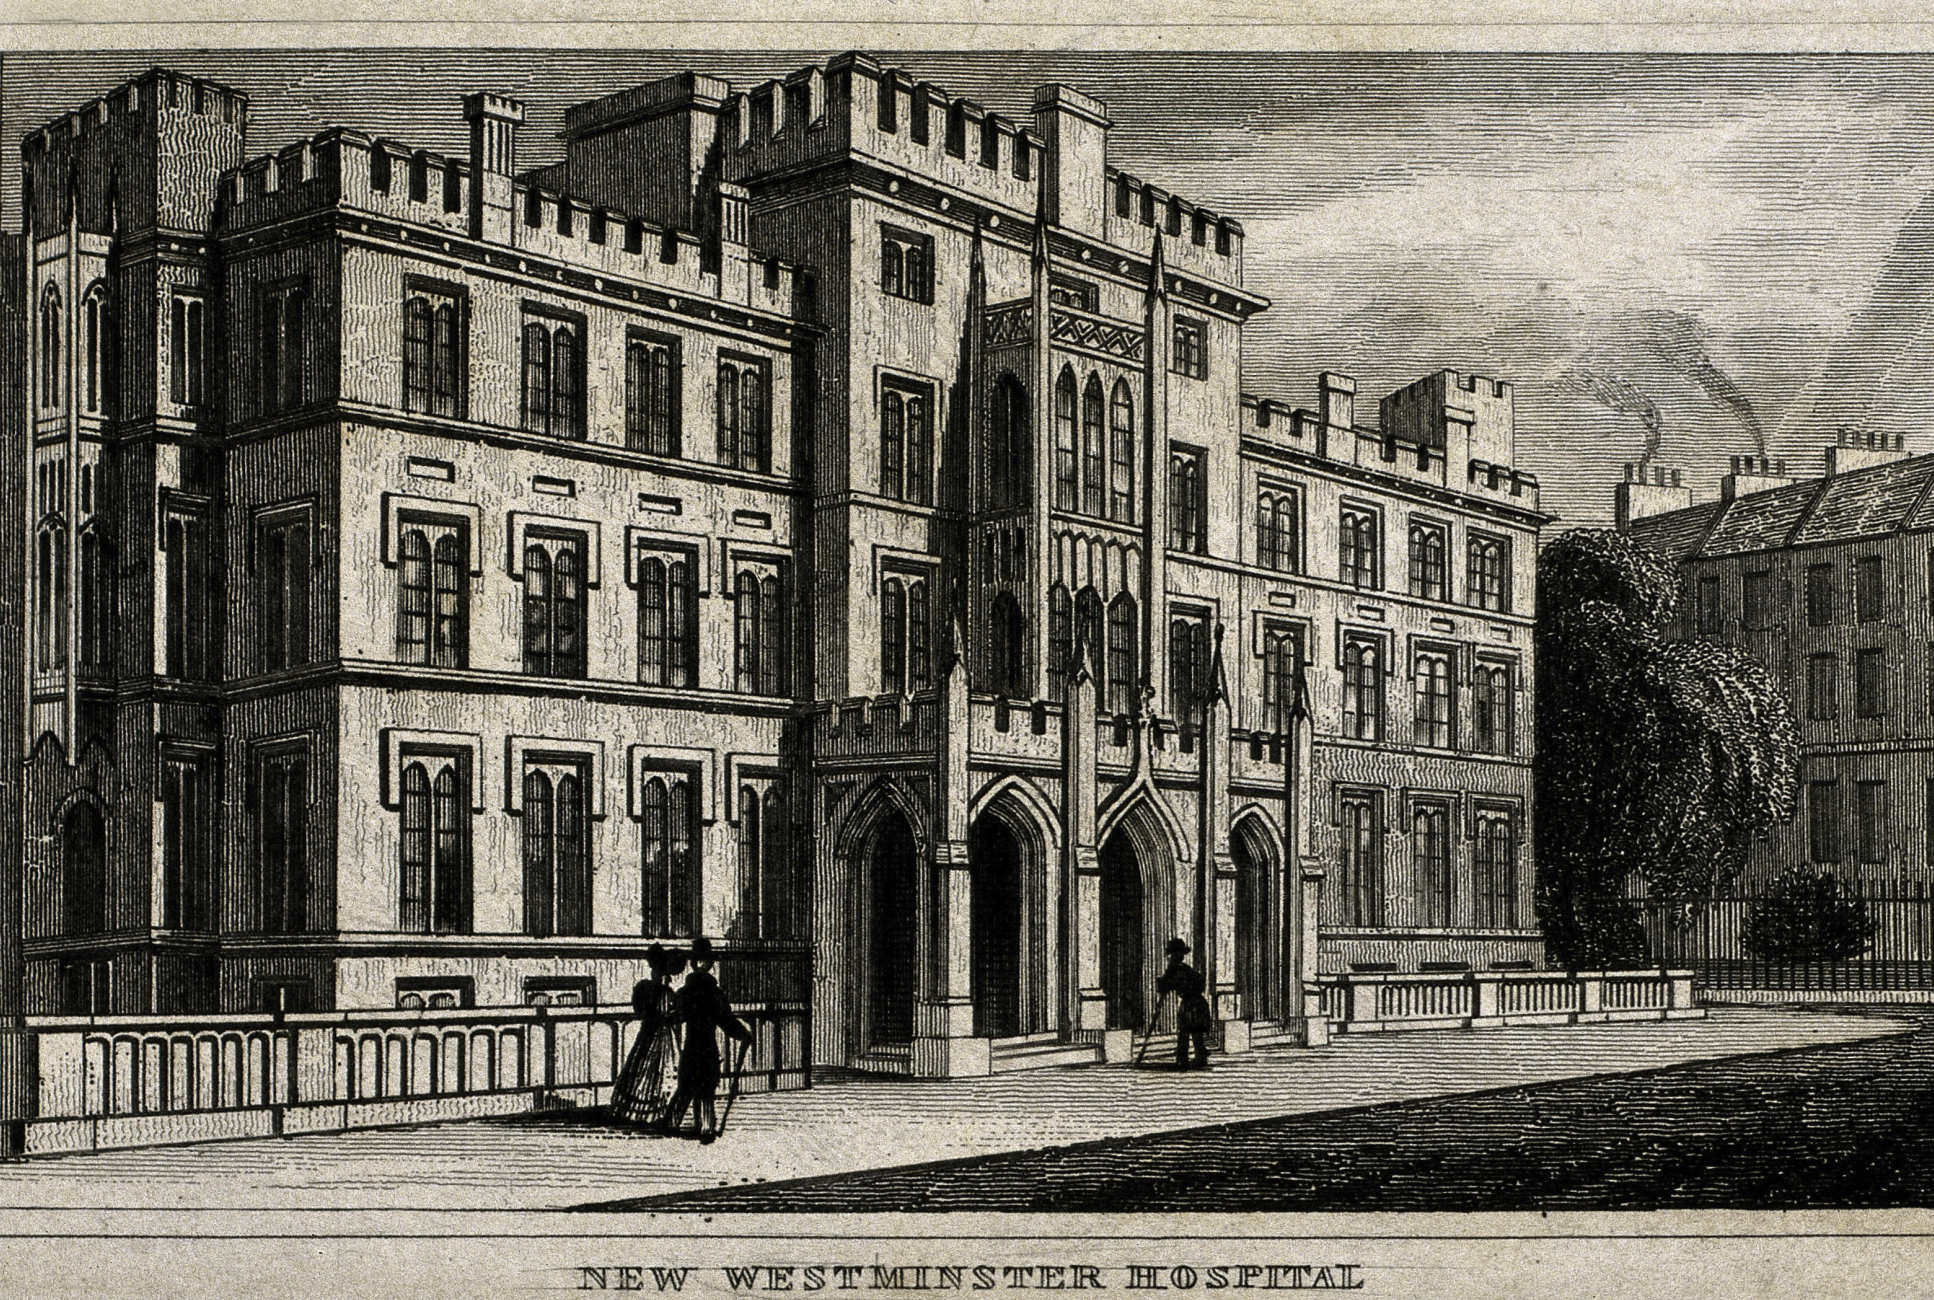 The new hospital at Broad Sanctuary (Image: Wellcome Collection)